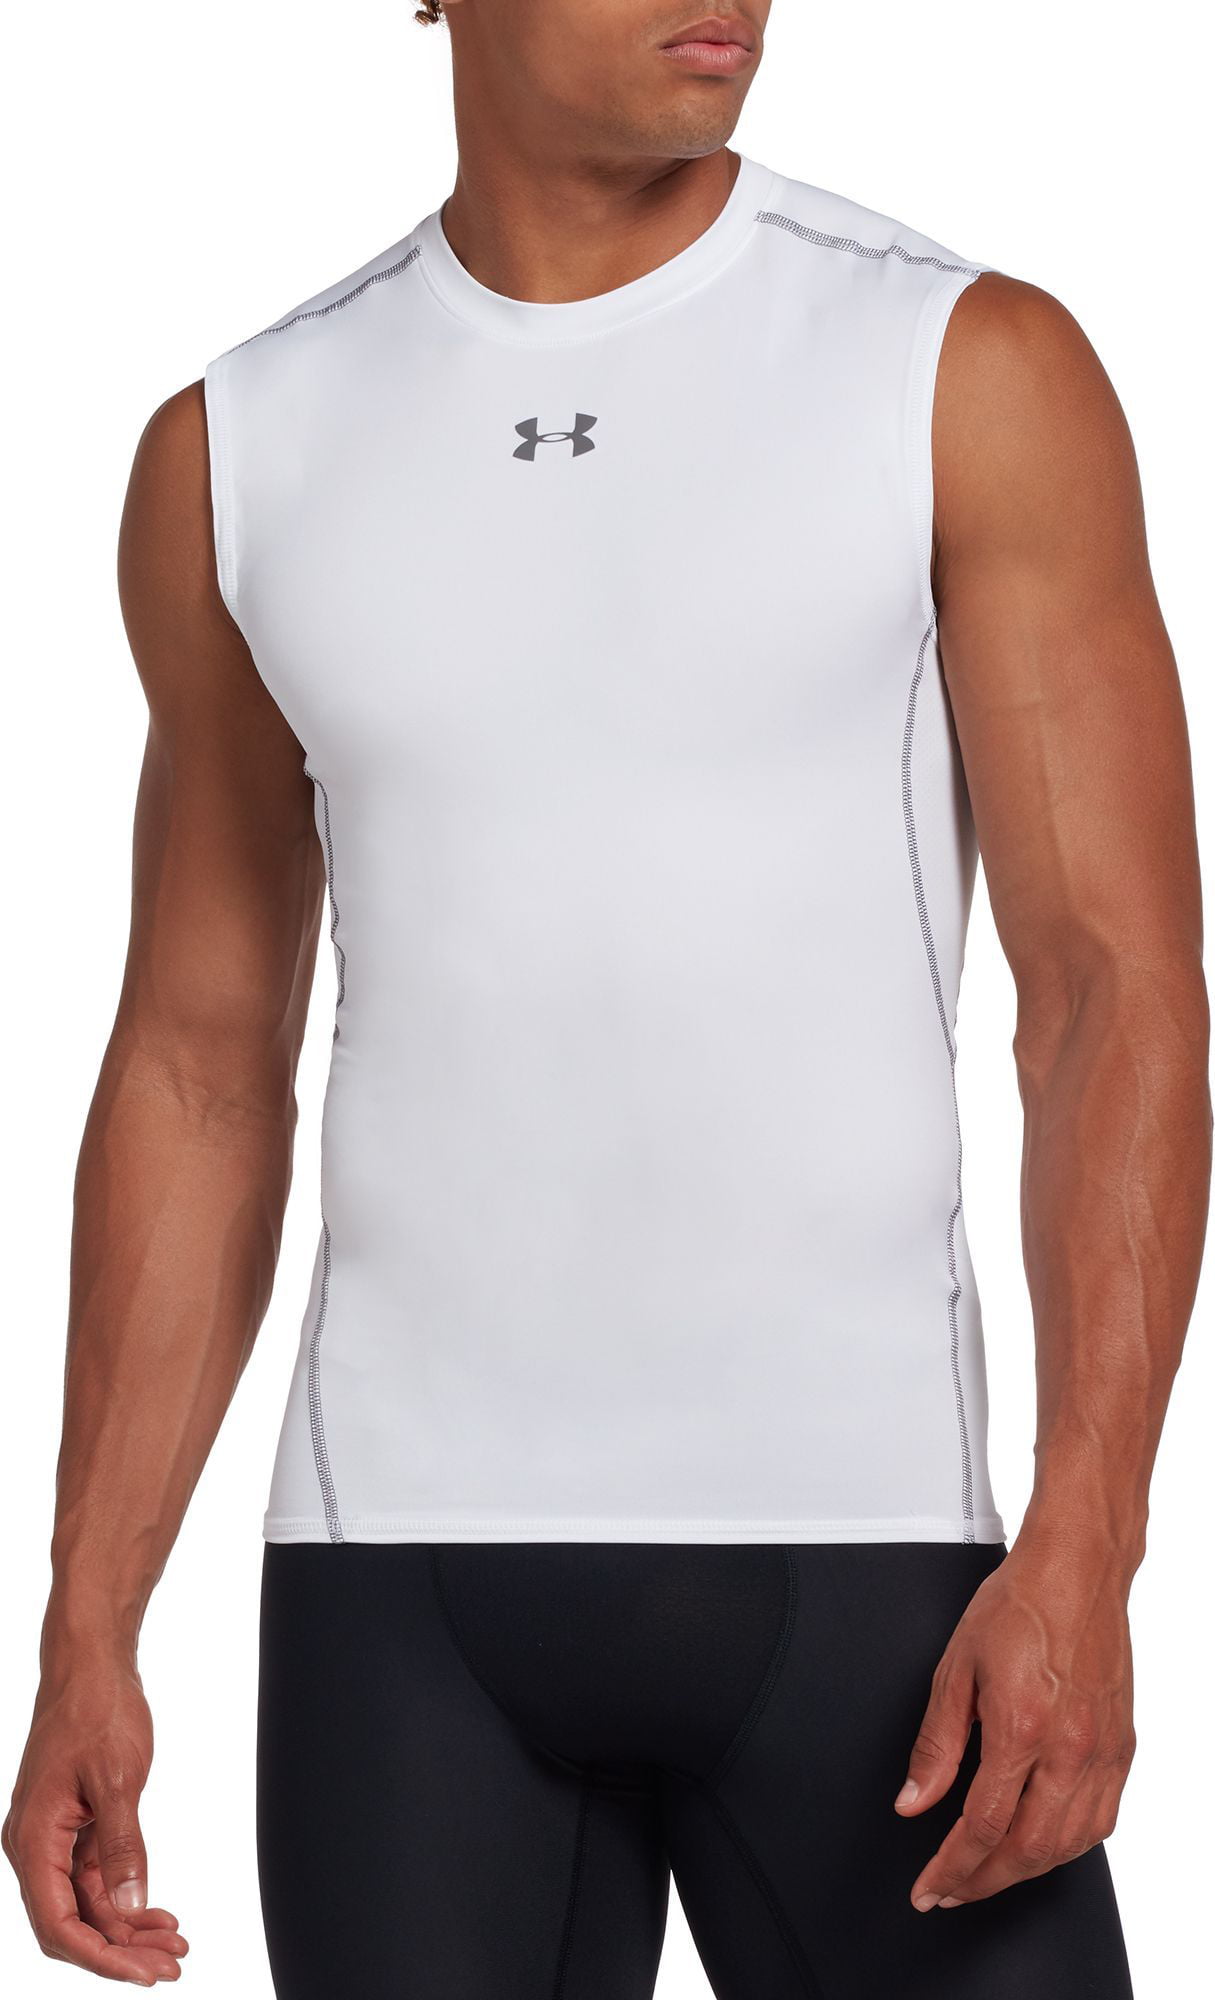 Under Armour Mens HeatGear Sleeveless Top White Sports Running Gym Breathable 